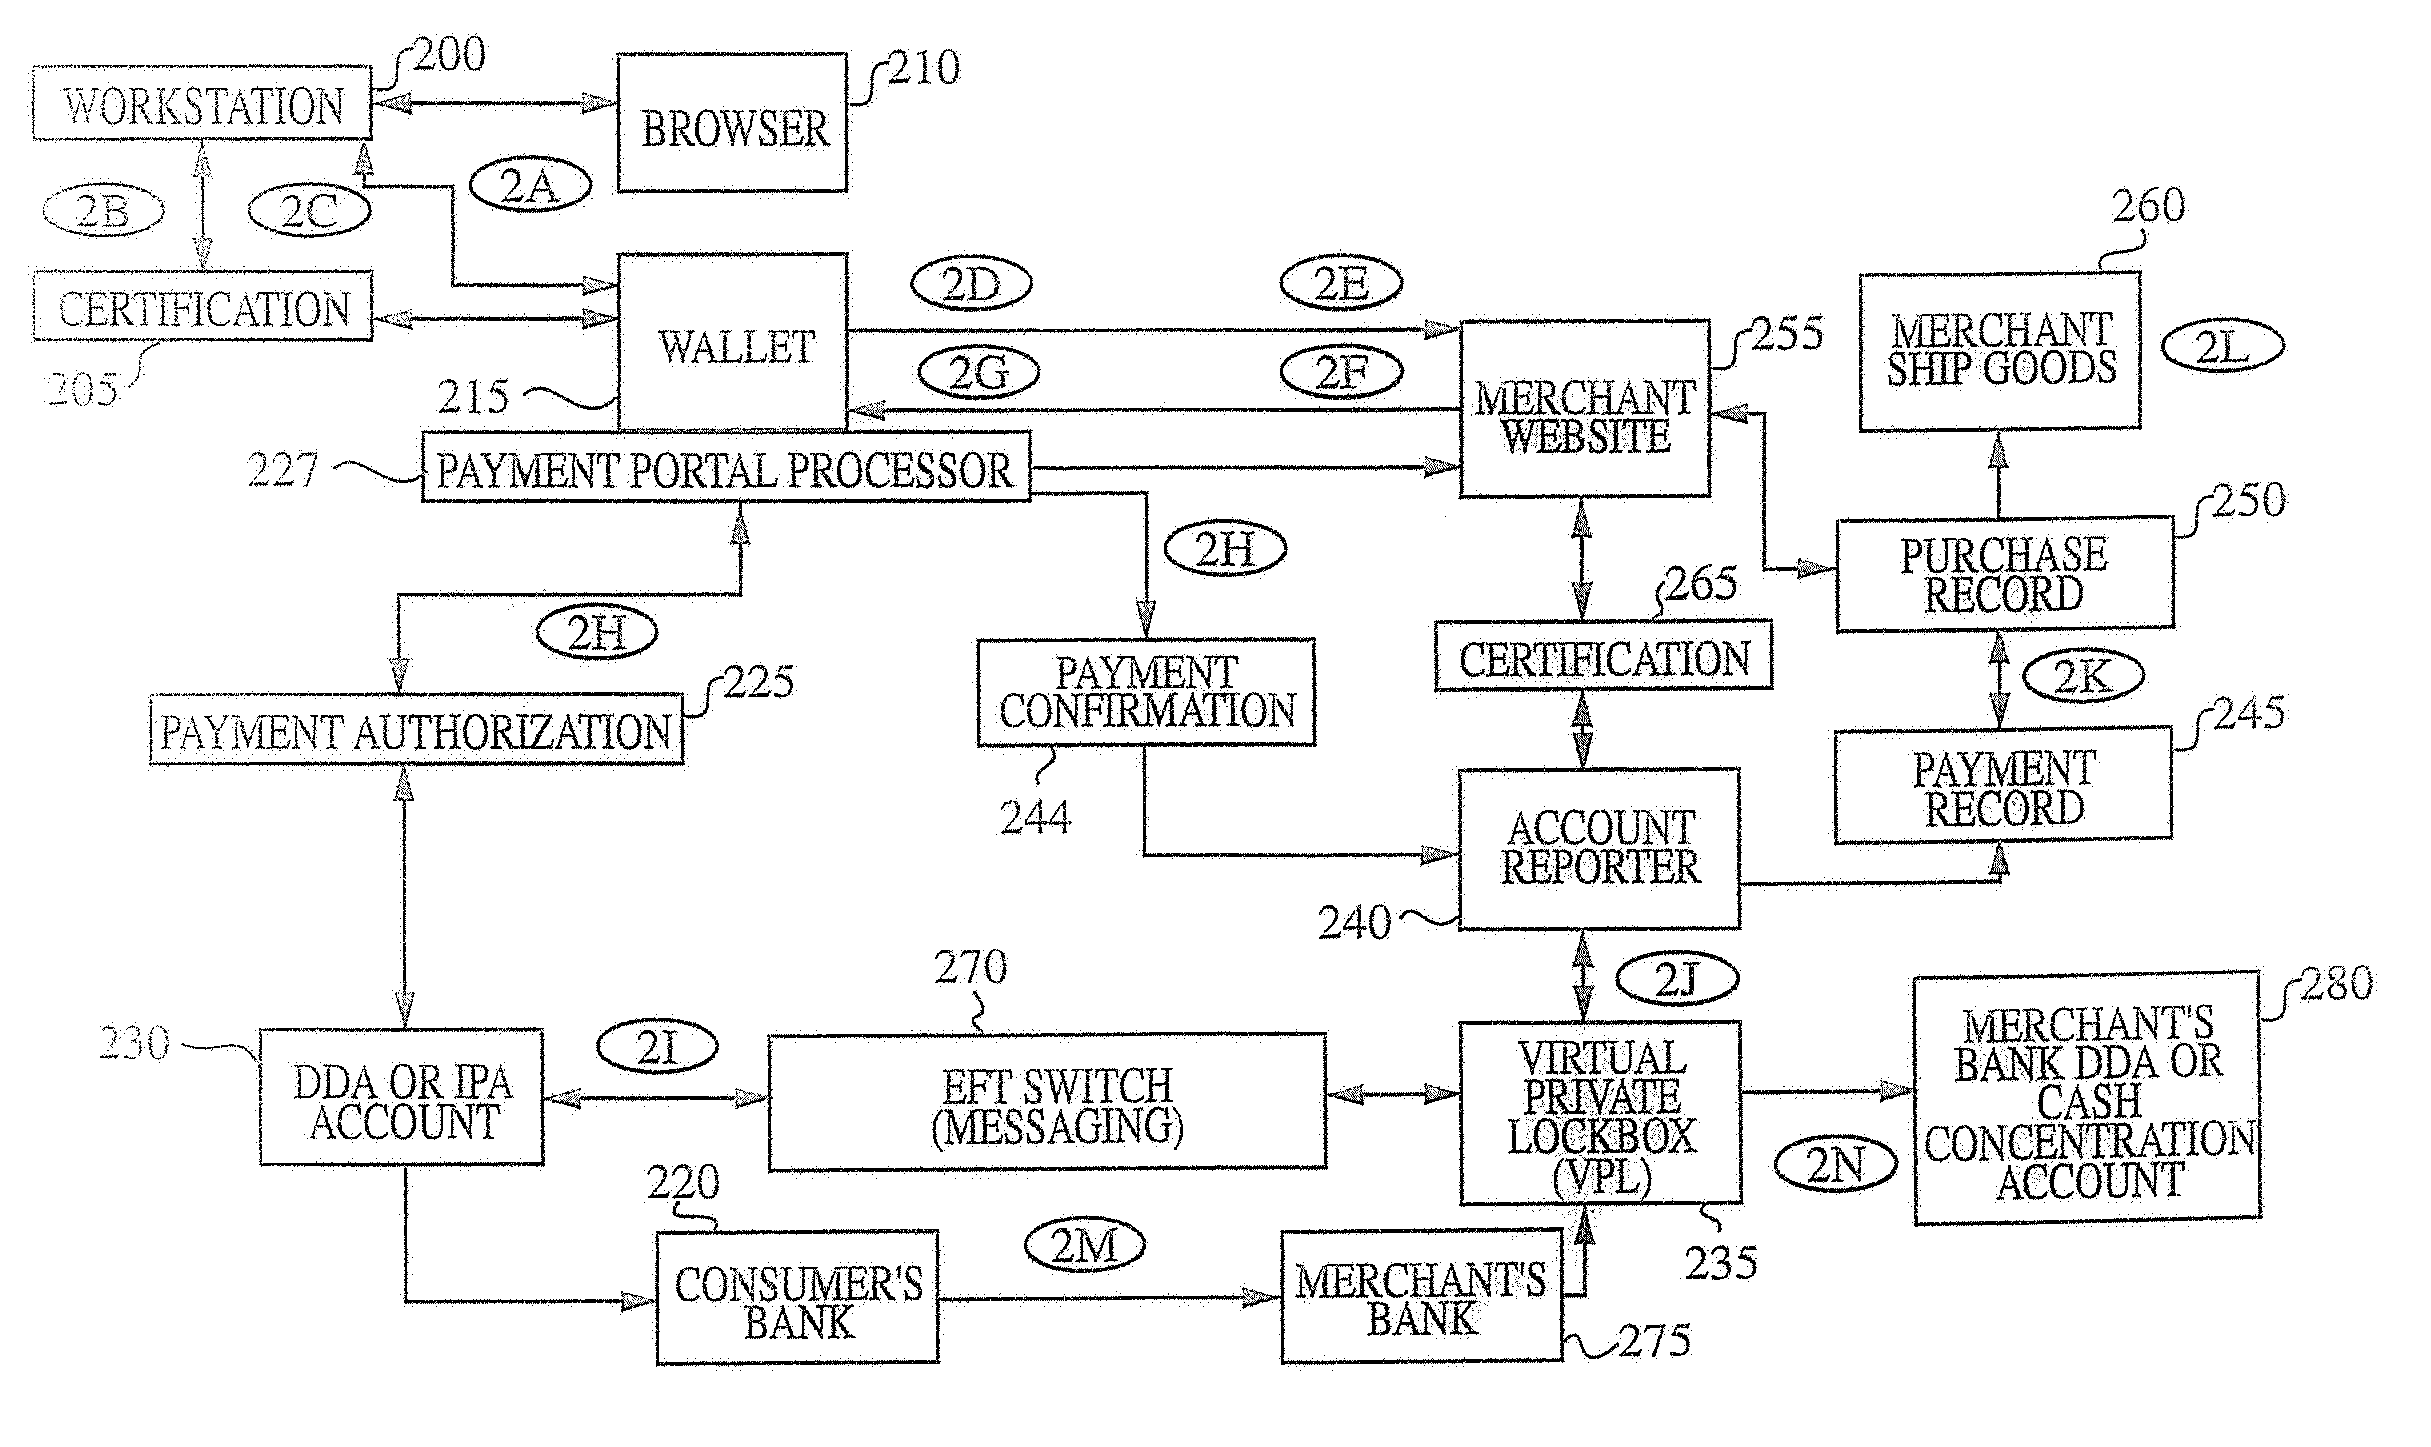 Method And System For Processing Internet Payments Using The Electronic Funds Transfer Network